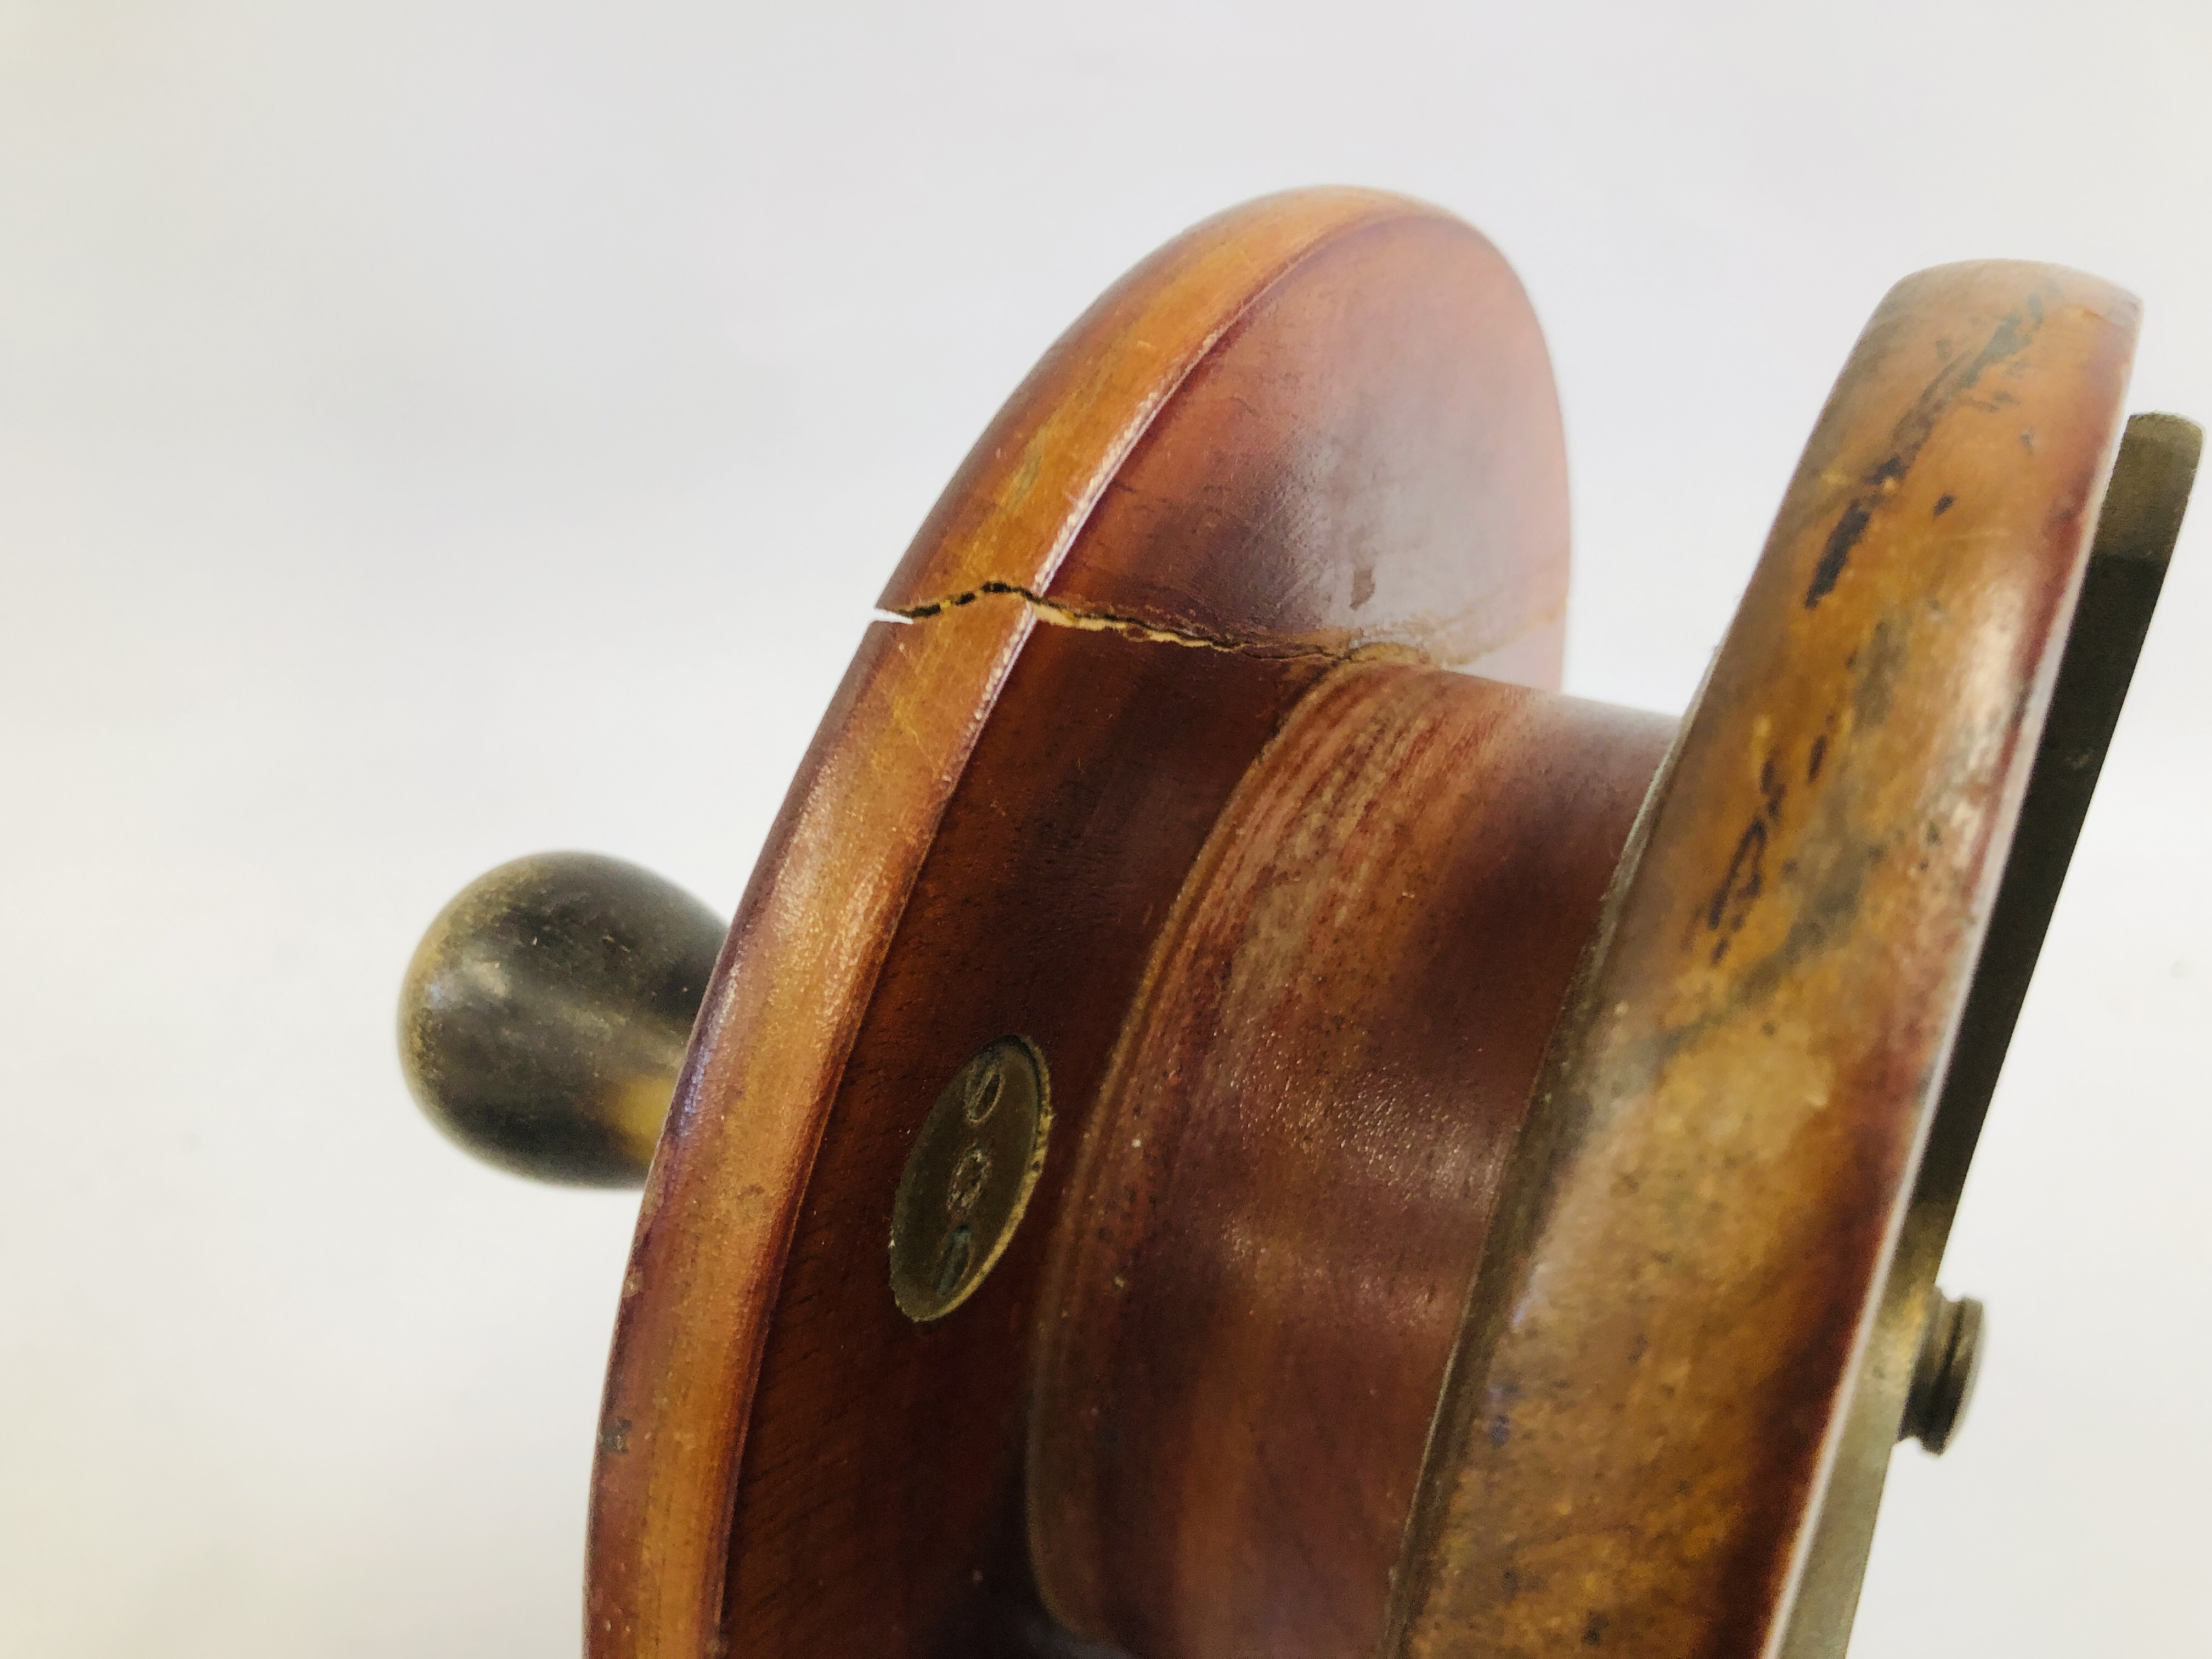 TWO "ALVEY" CENTRE PIN REELS TO INCLUDE SNAPPER REEL ALONG WITH A VINTAGE BRASS MOUNTED CENTRE PIN - Image 10 of 12